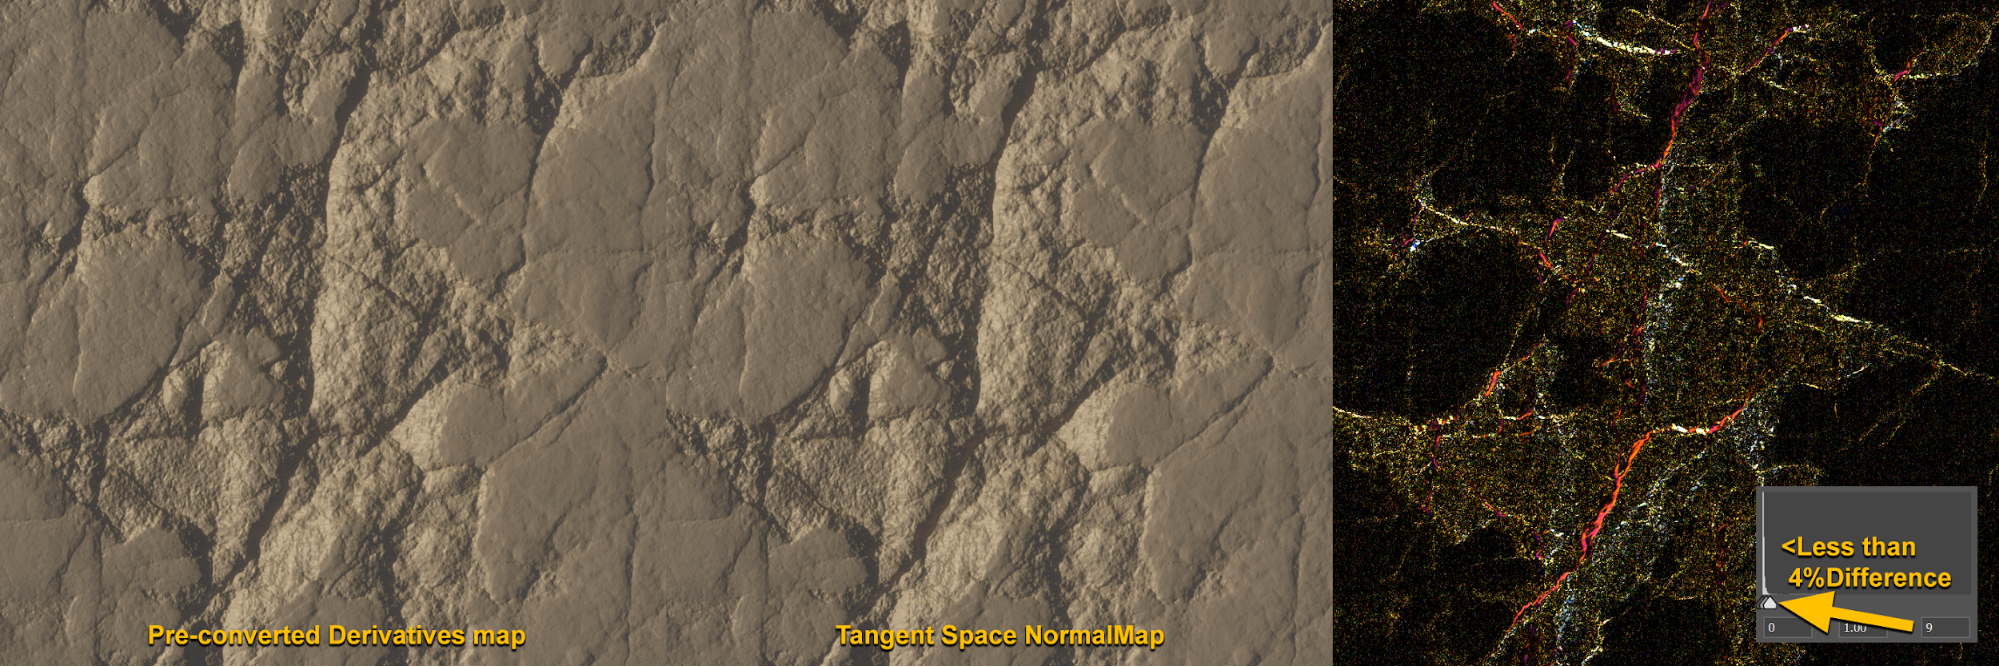 A comparison of a pre-converted derivatives map texture and a tangent space normal map texture.